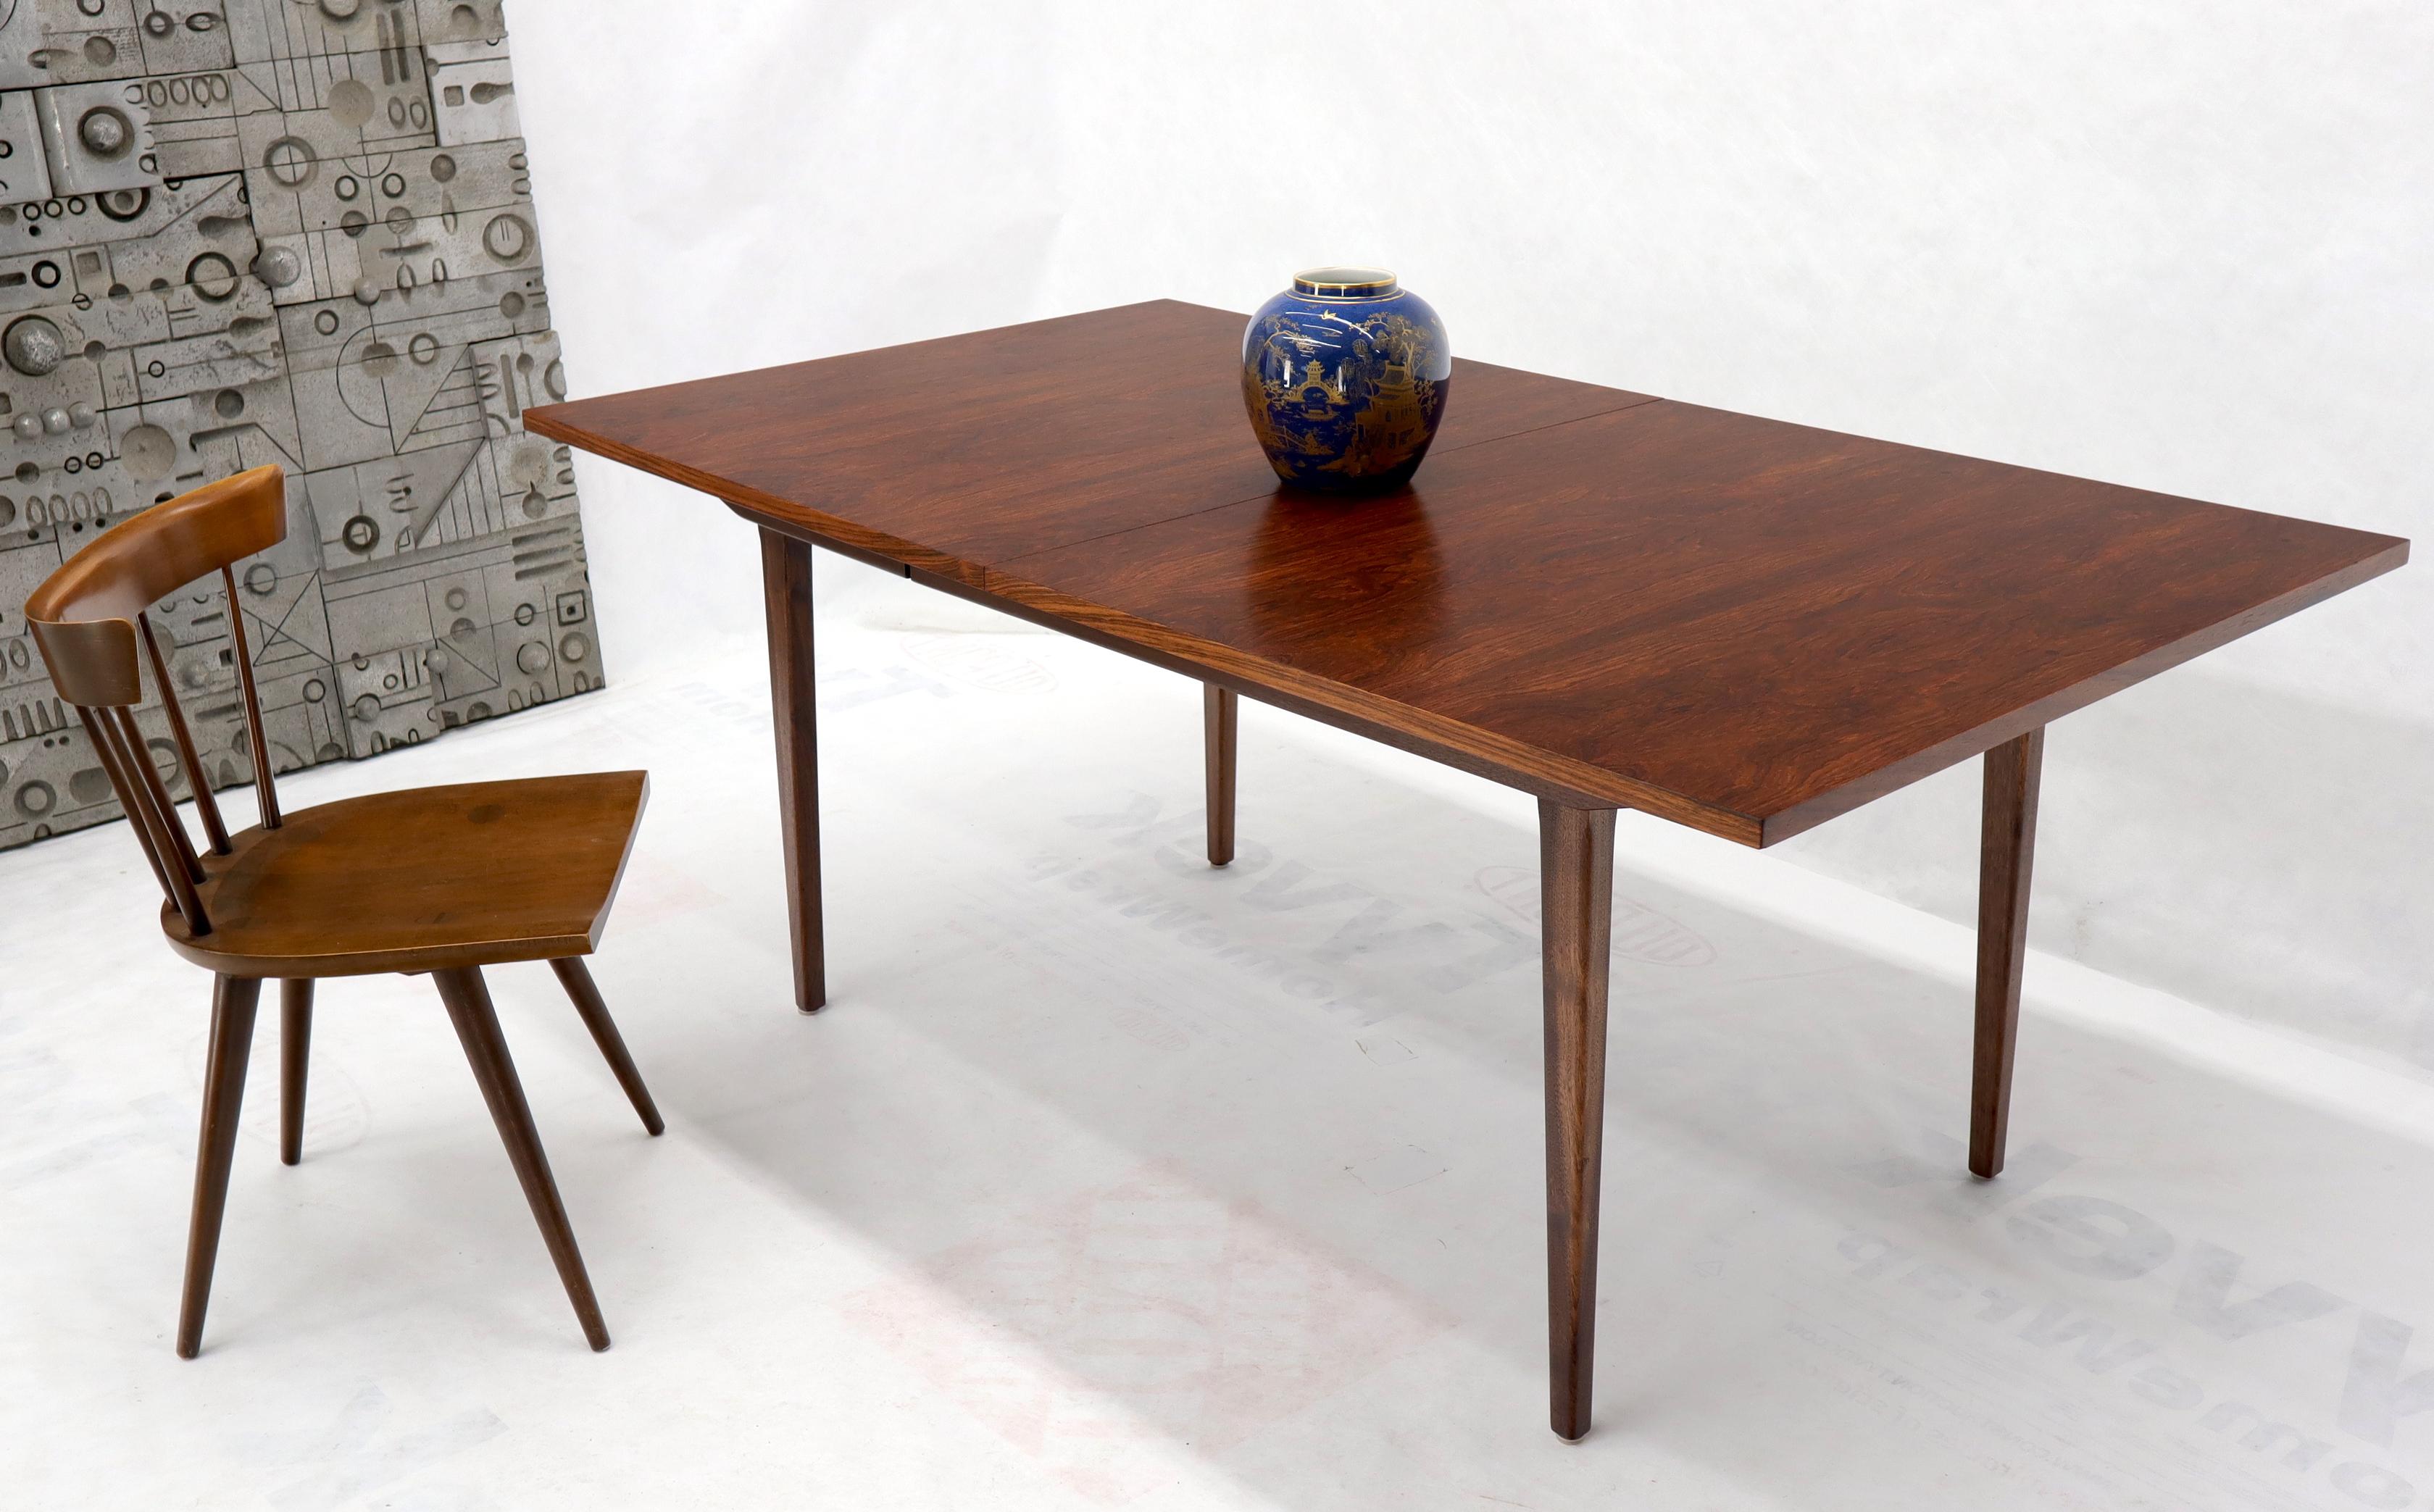 20th Century Rosewood Rectangular Dining Table by George Nelson for Herman Miller 2 Leaves For Sale